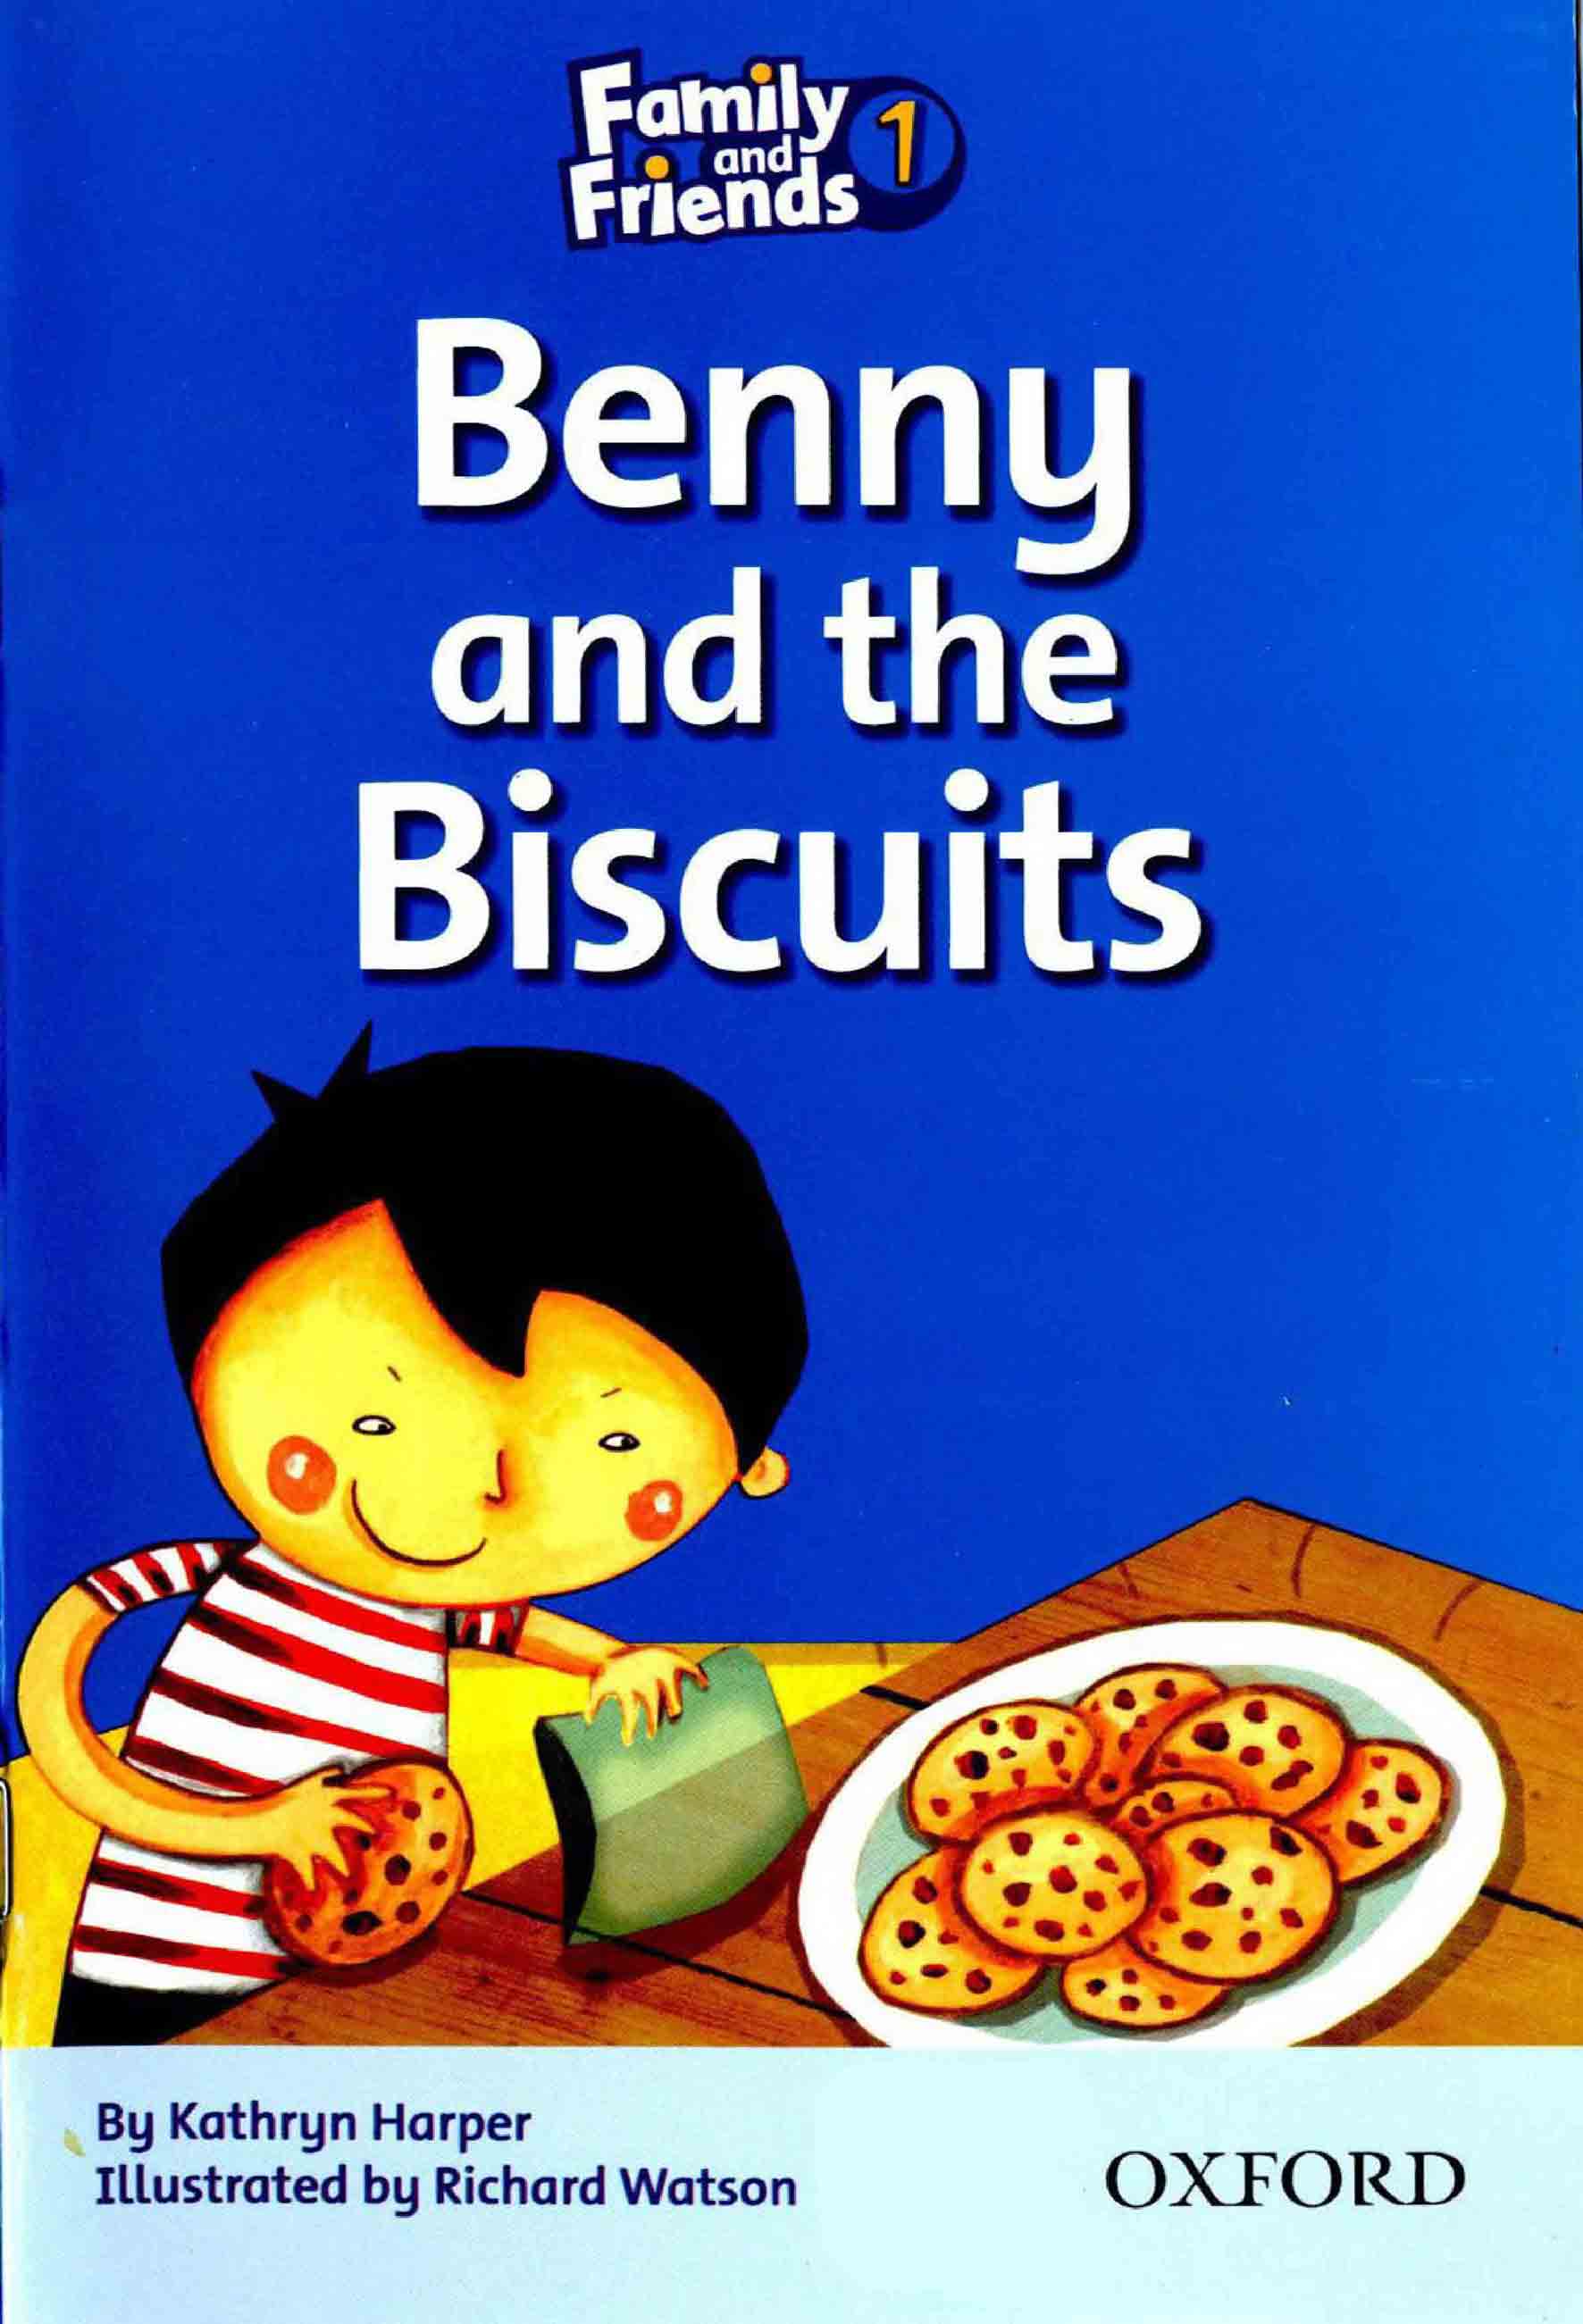 Benny and the Biscuits